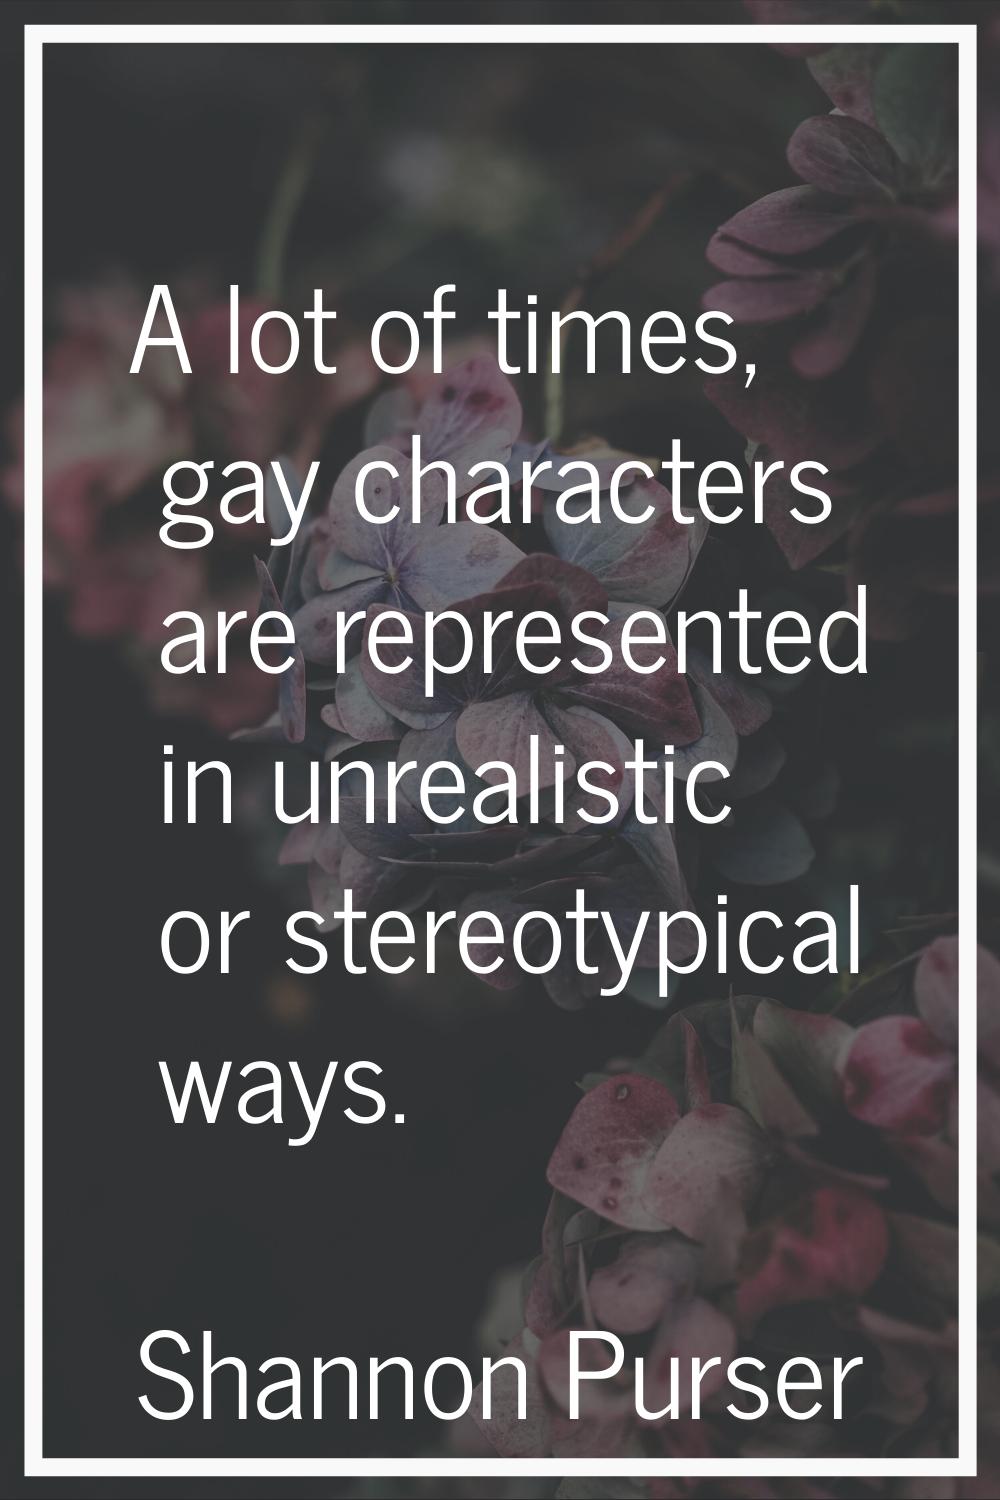 A lot of times, gay characters are represented in unrealistic or stereotypical ways.